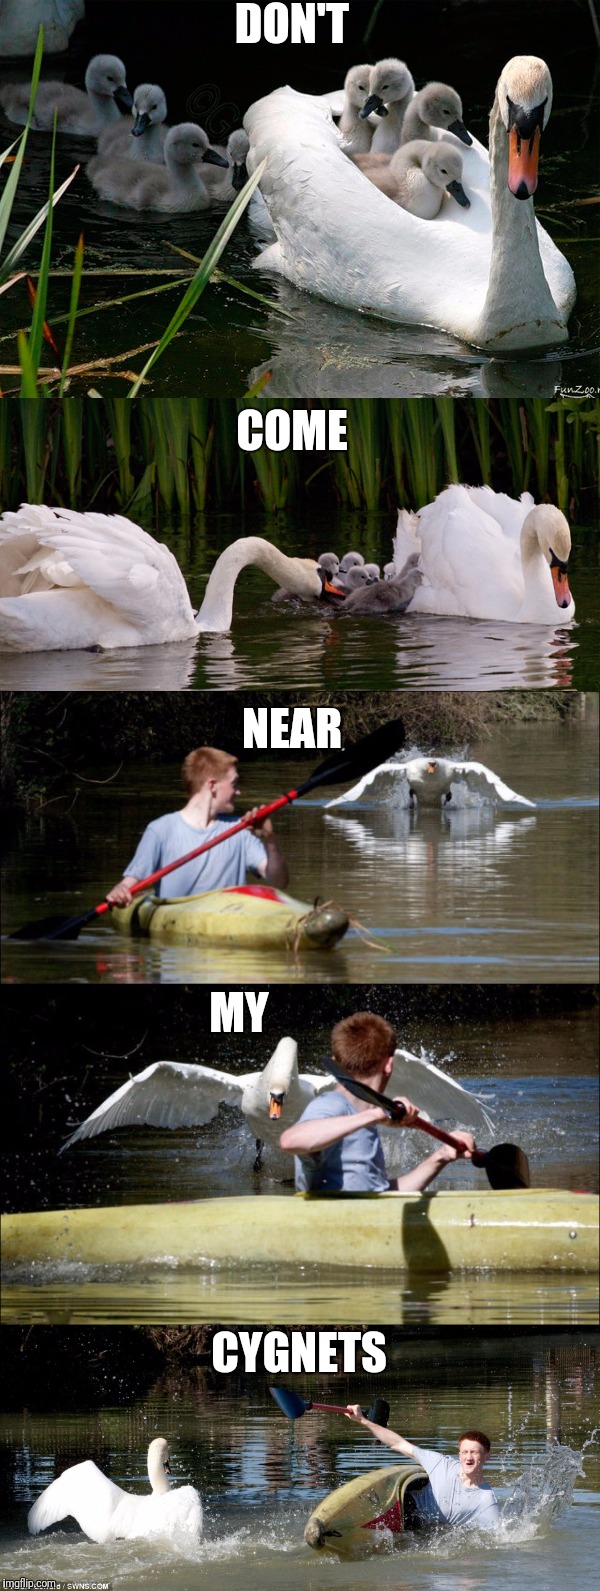 DON'T CYGNETS COME NEAR MY | made w/ Imgflip meme maker